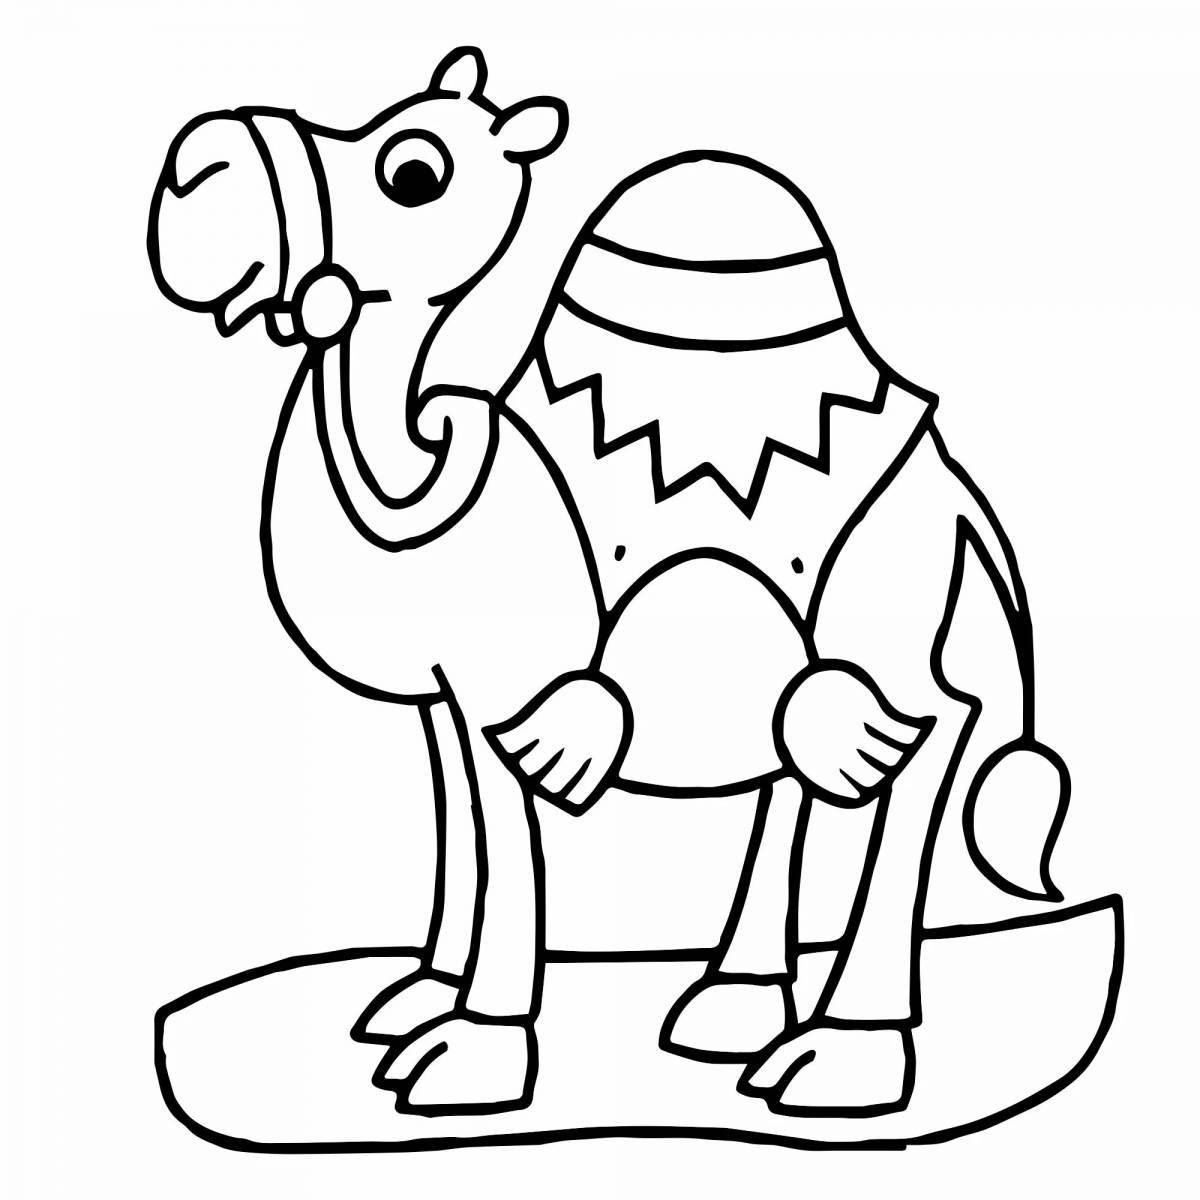 Coloring page dazzling camel